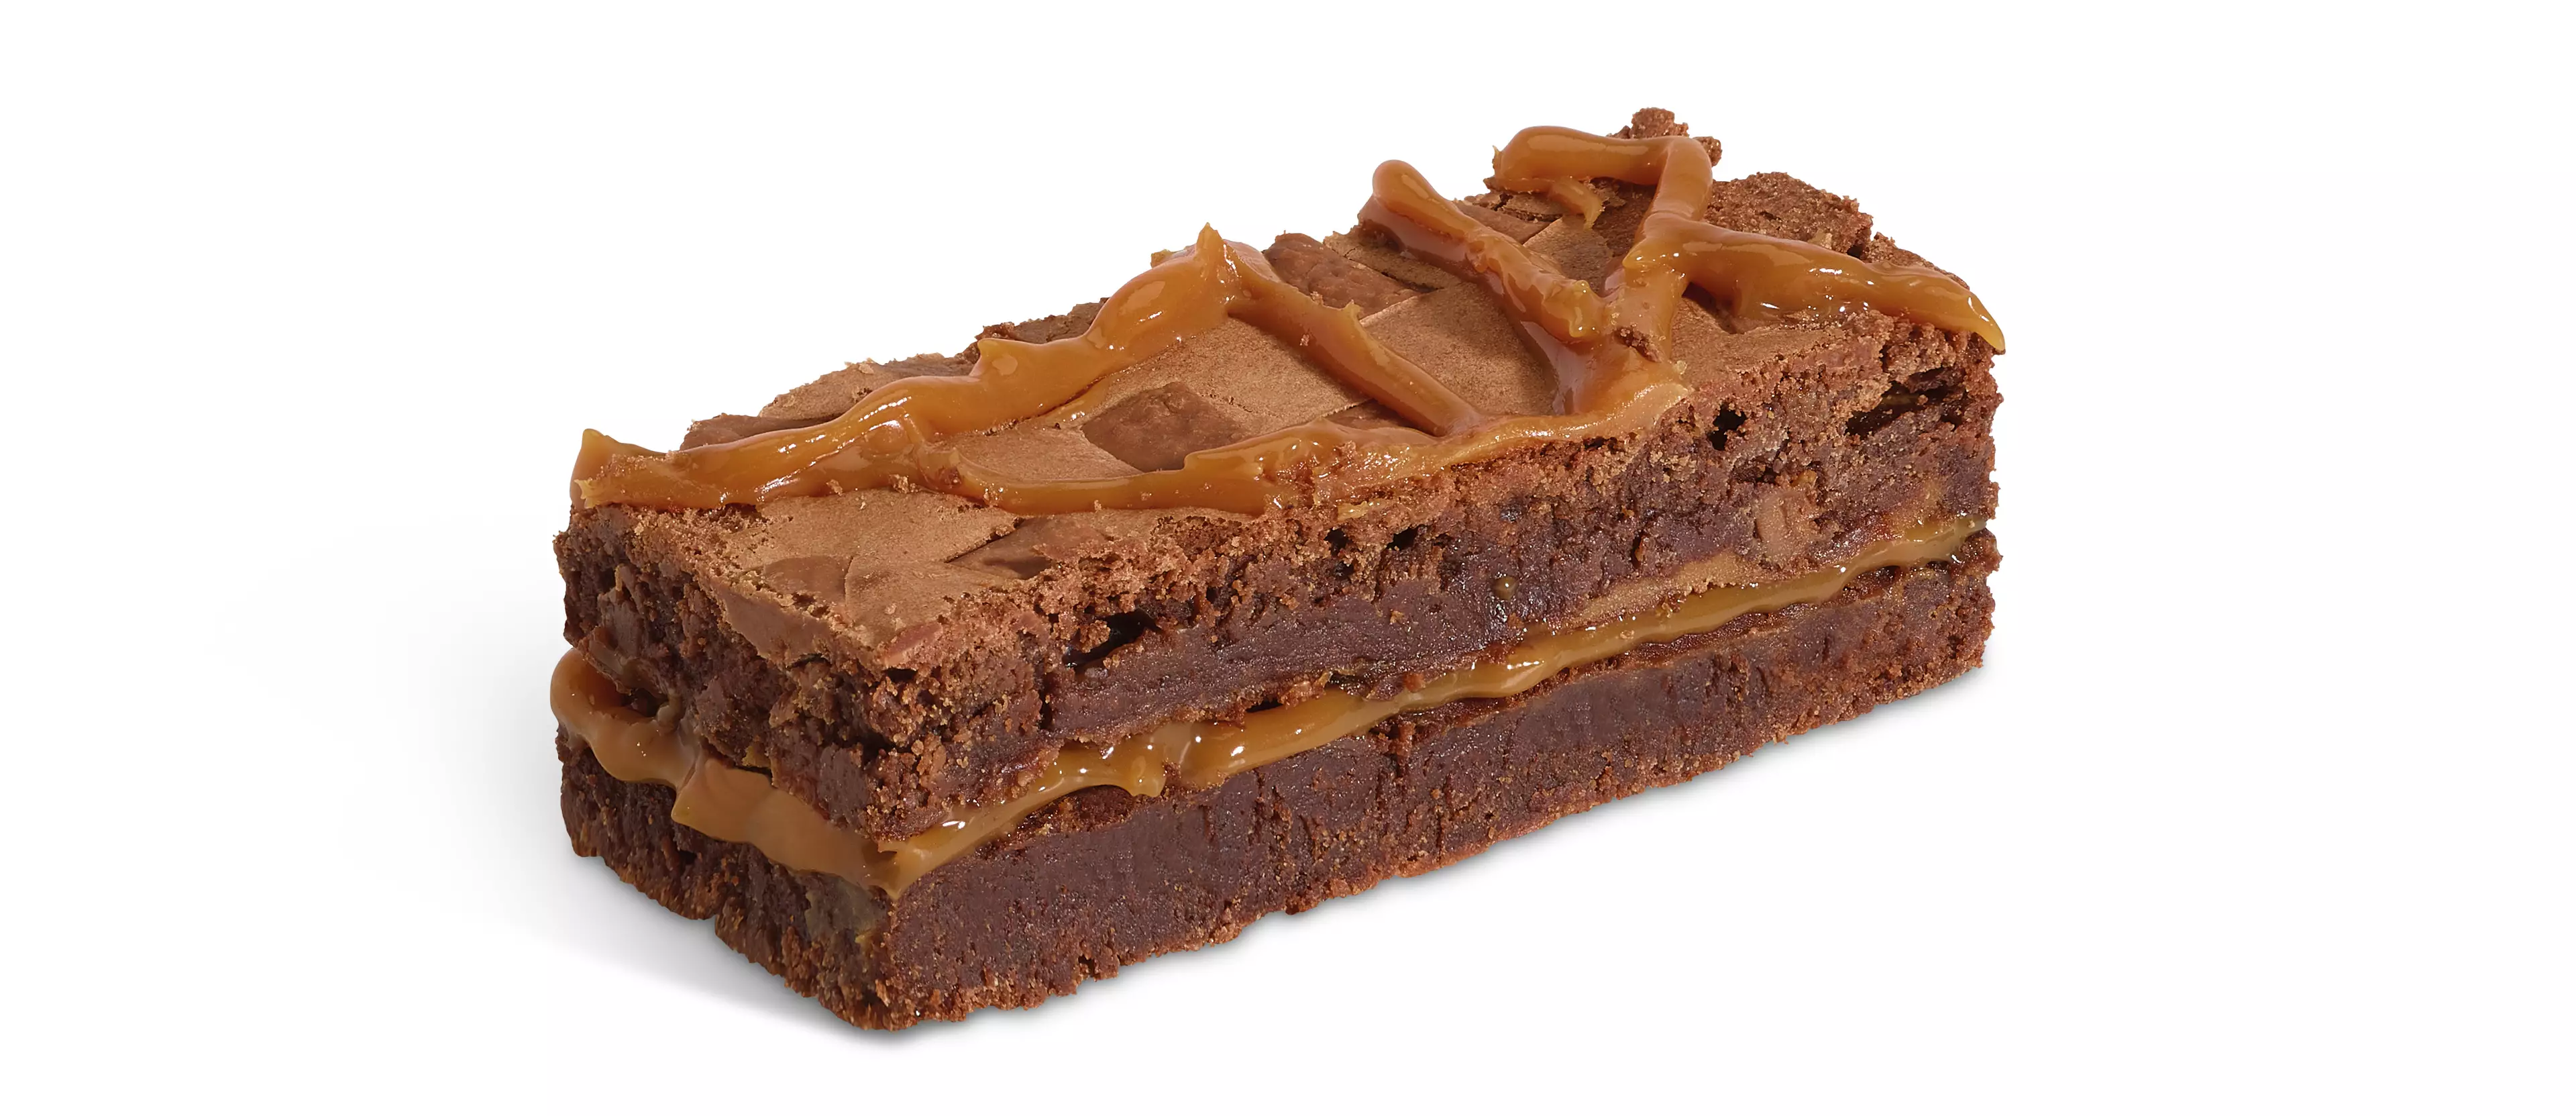 The Salted Caramel Brownie is new on the menu this spring (